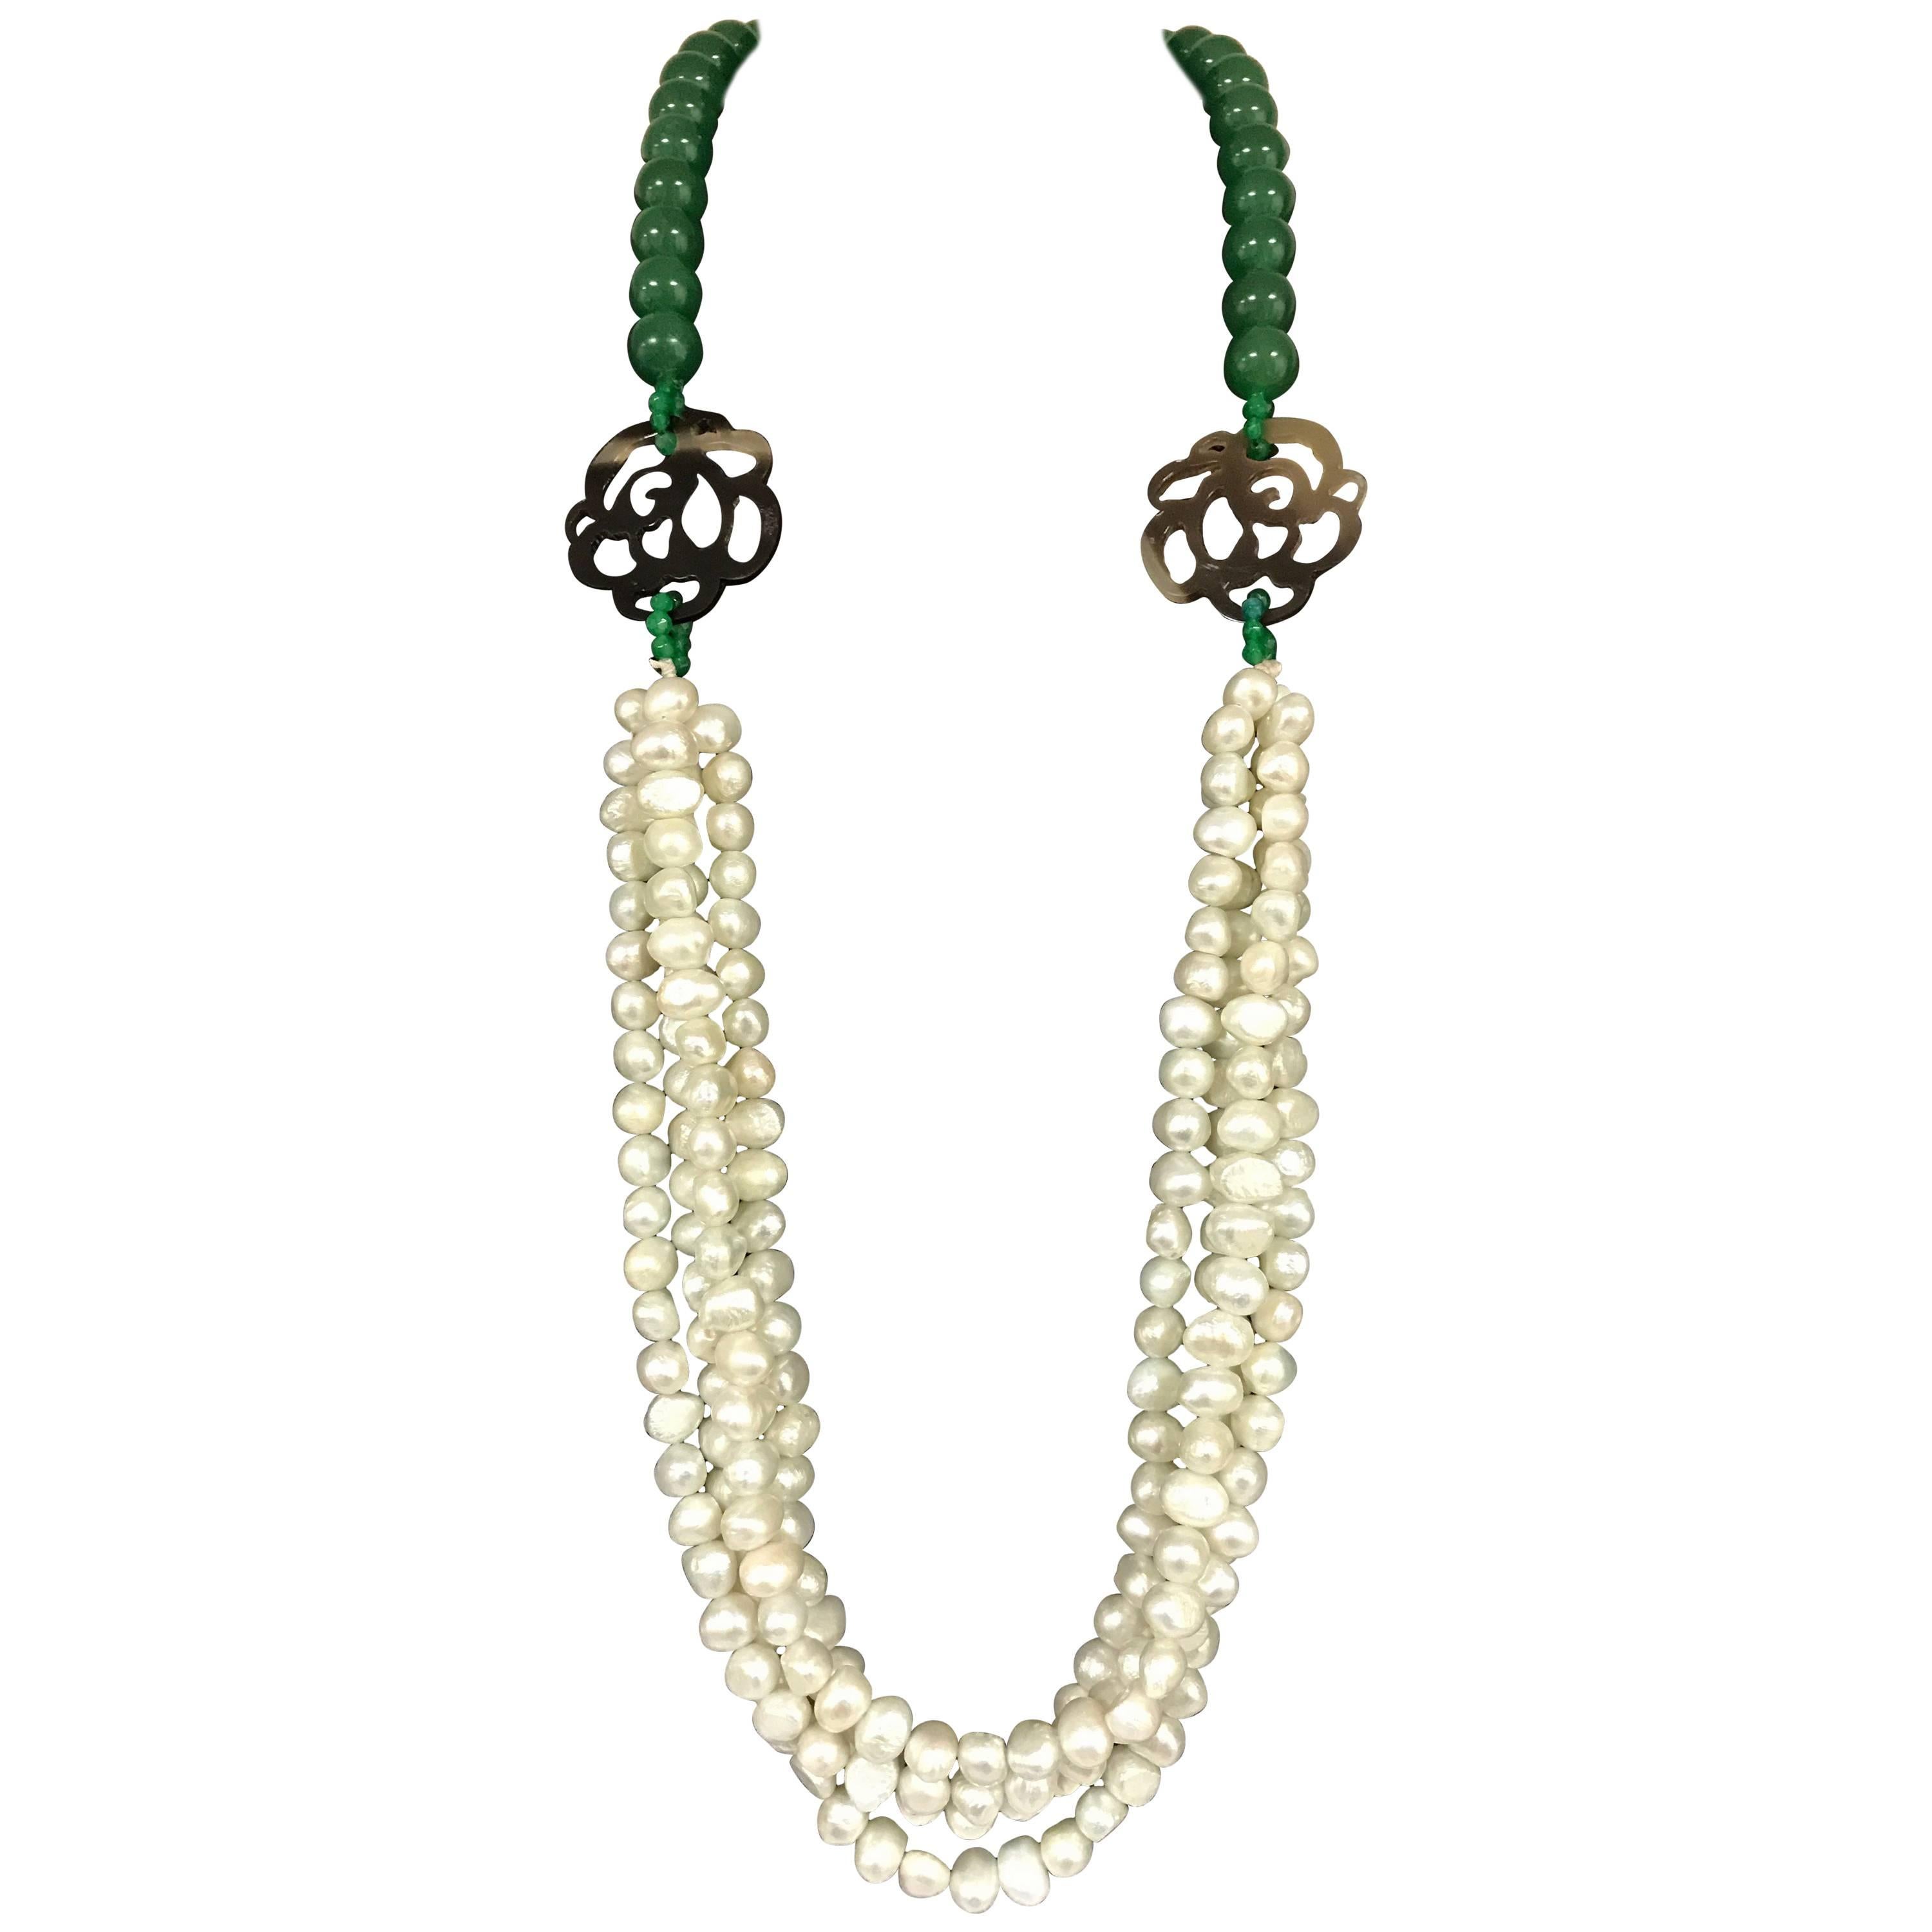 Baroque Pearls and Green Pearls Necklace